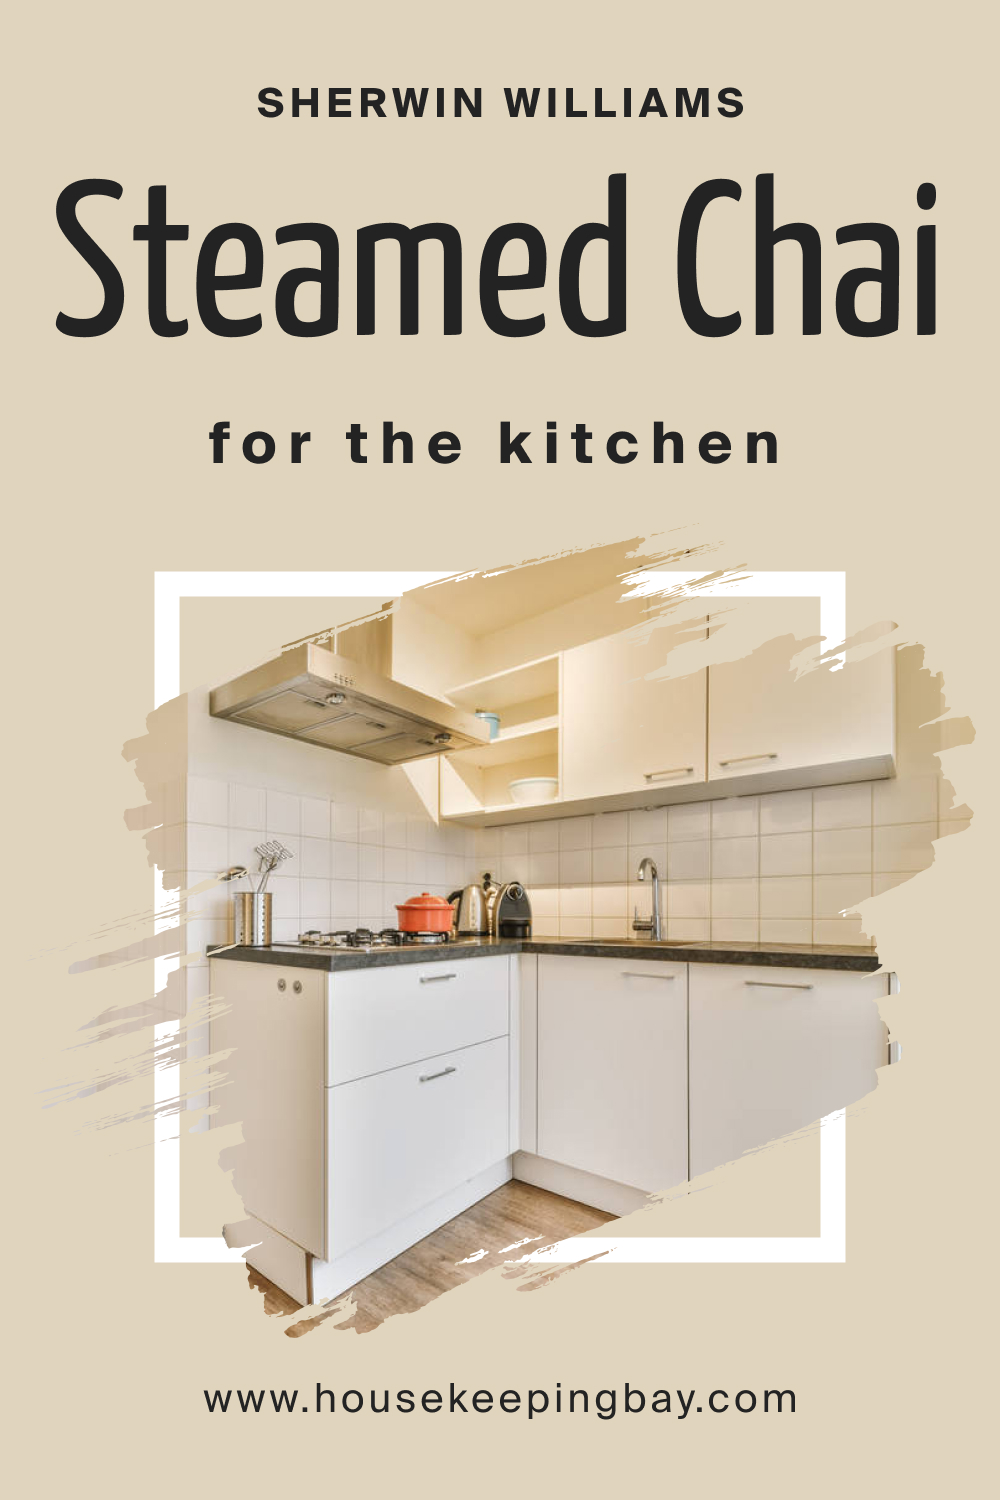 Sherwin Williams. SW 9509 Steamed Chai For the Kitchens